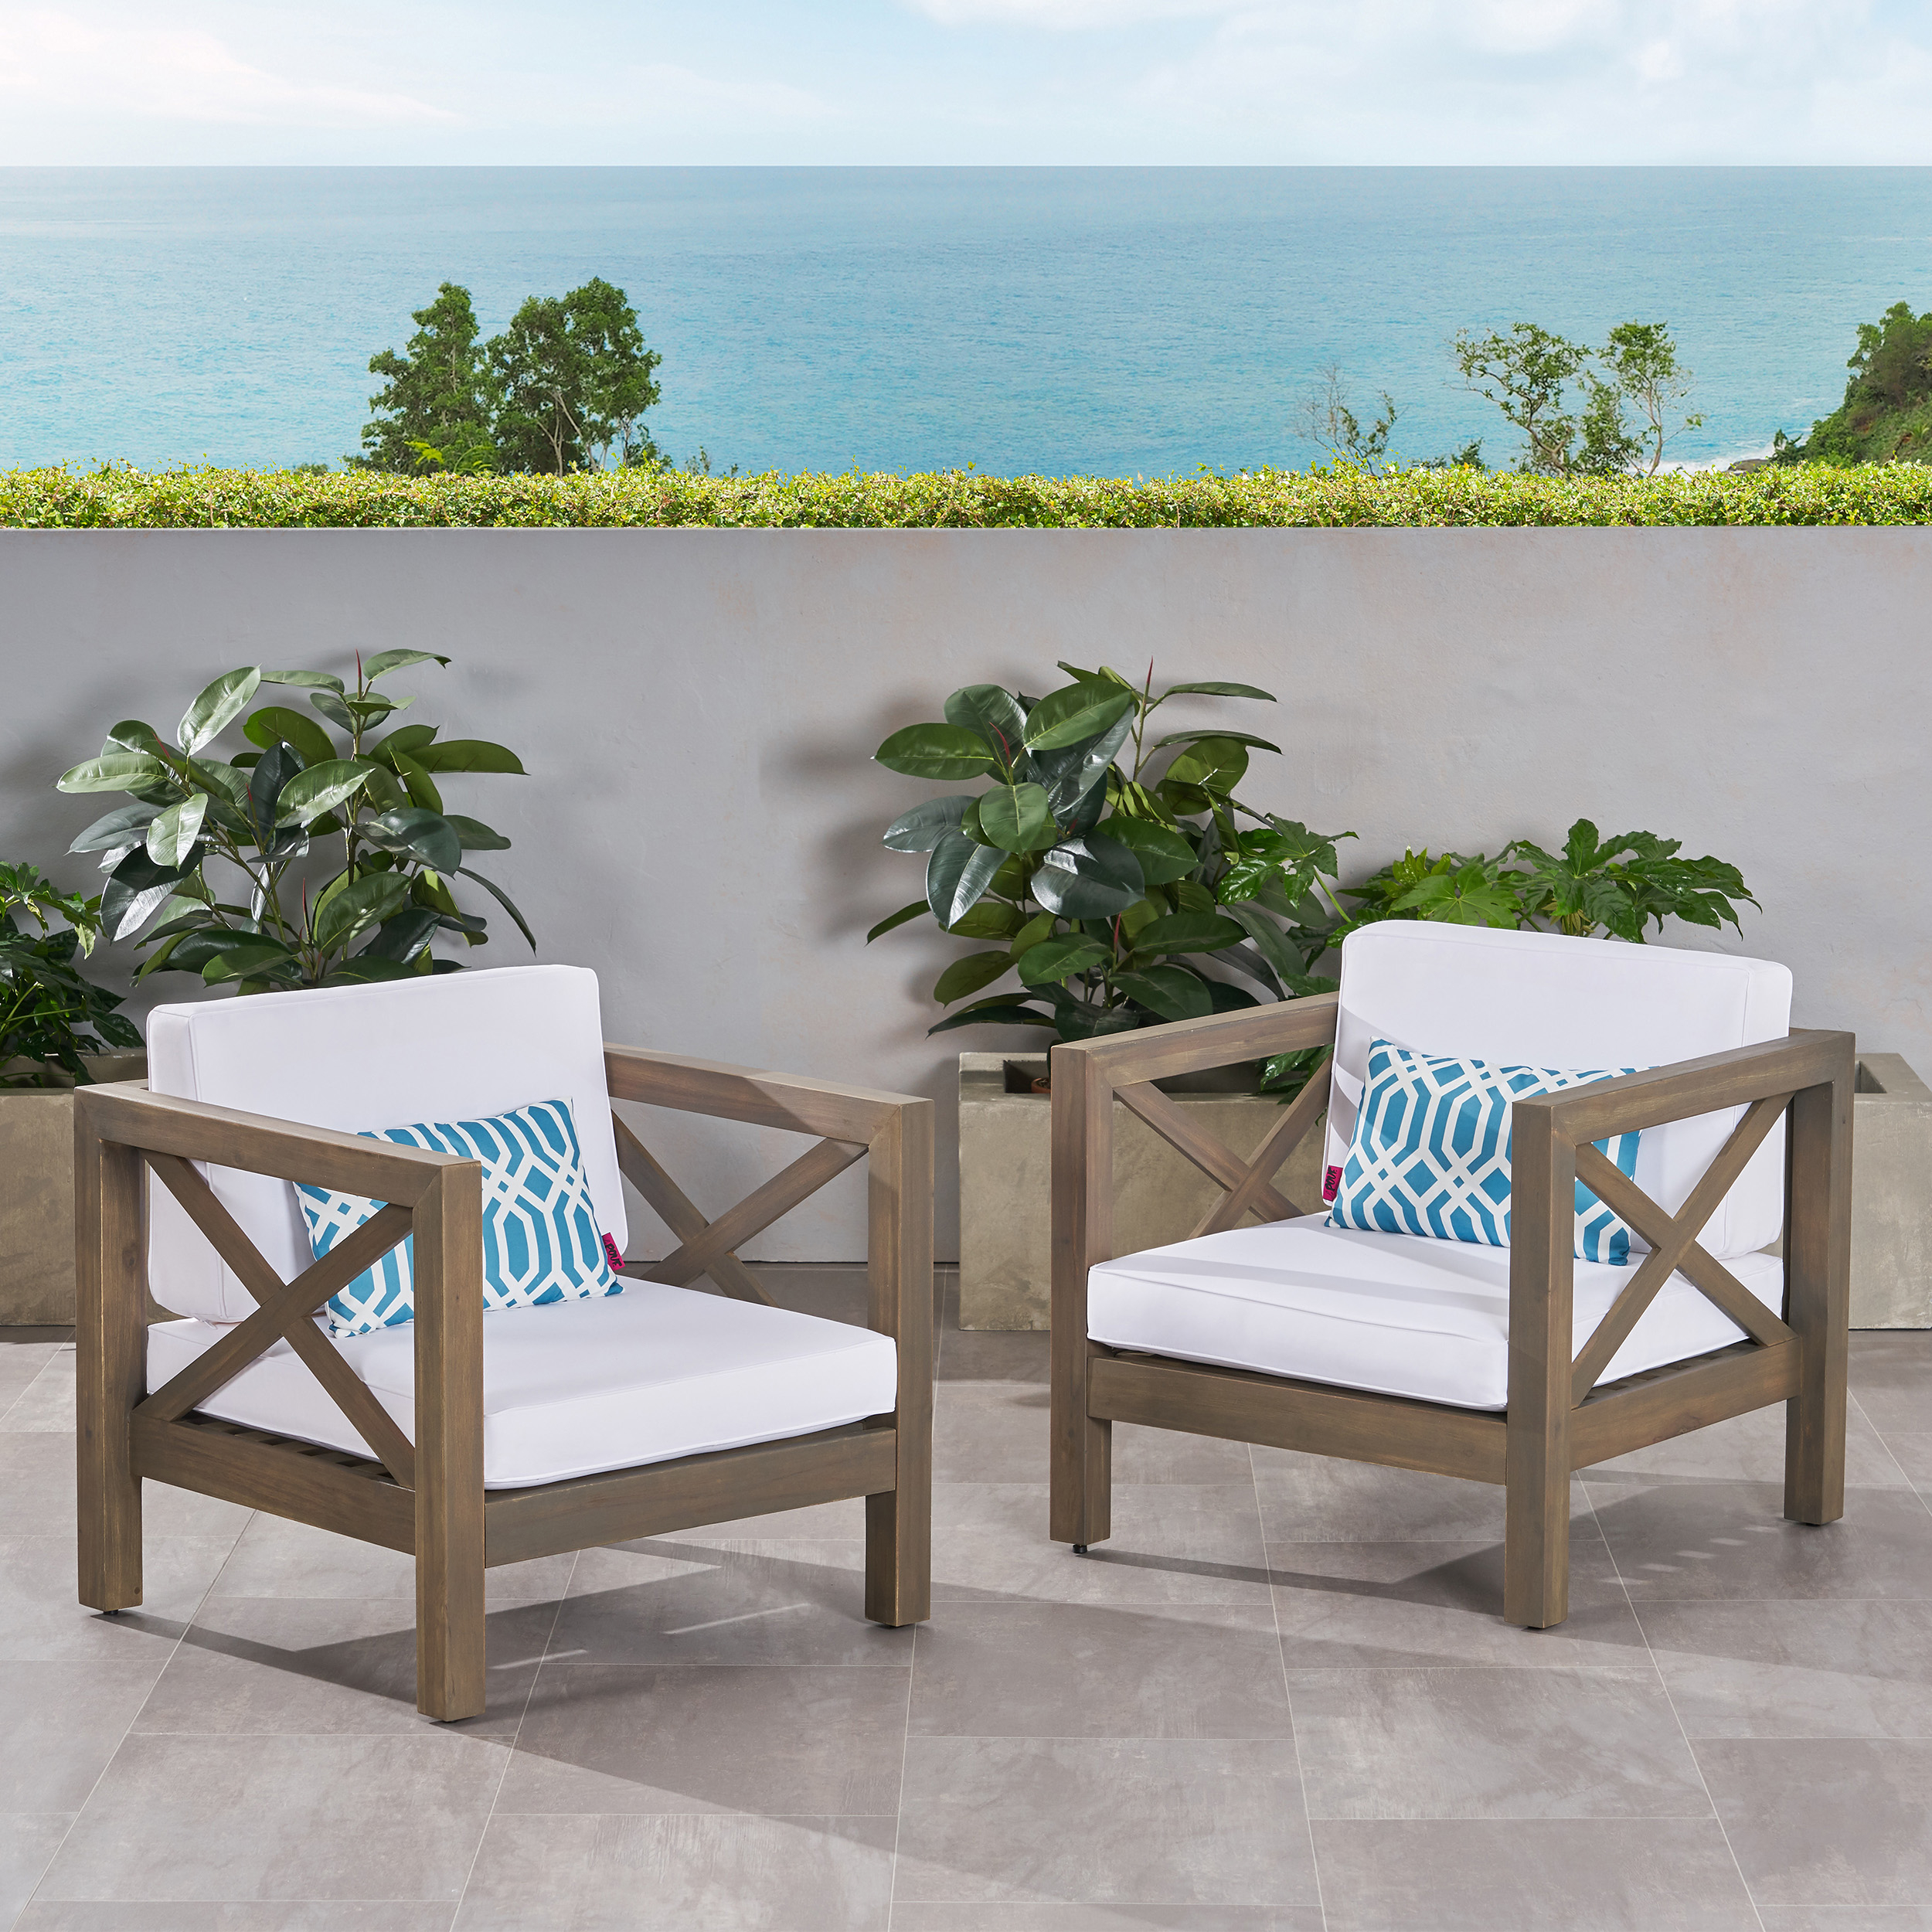 Indira Outdoor Acacia Wood Club Chairs With Cushions (Set Of 2) - Gray + White